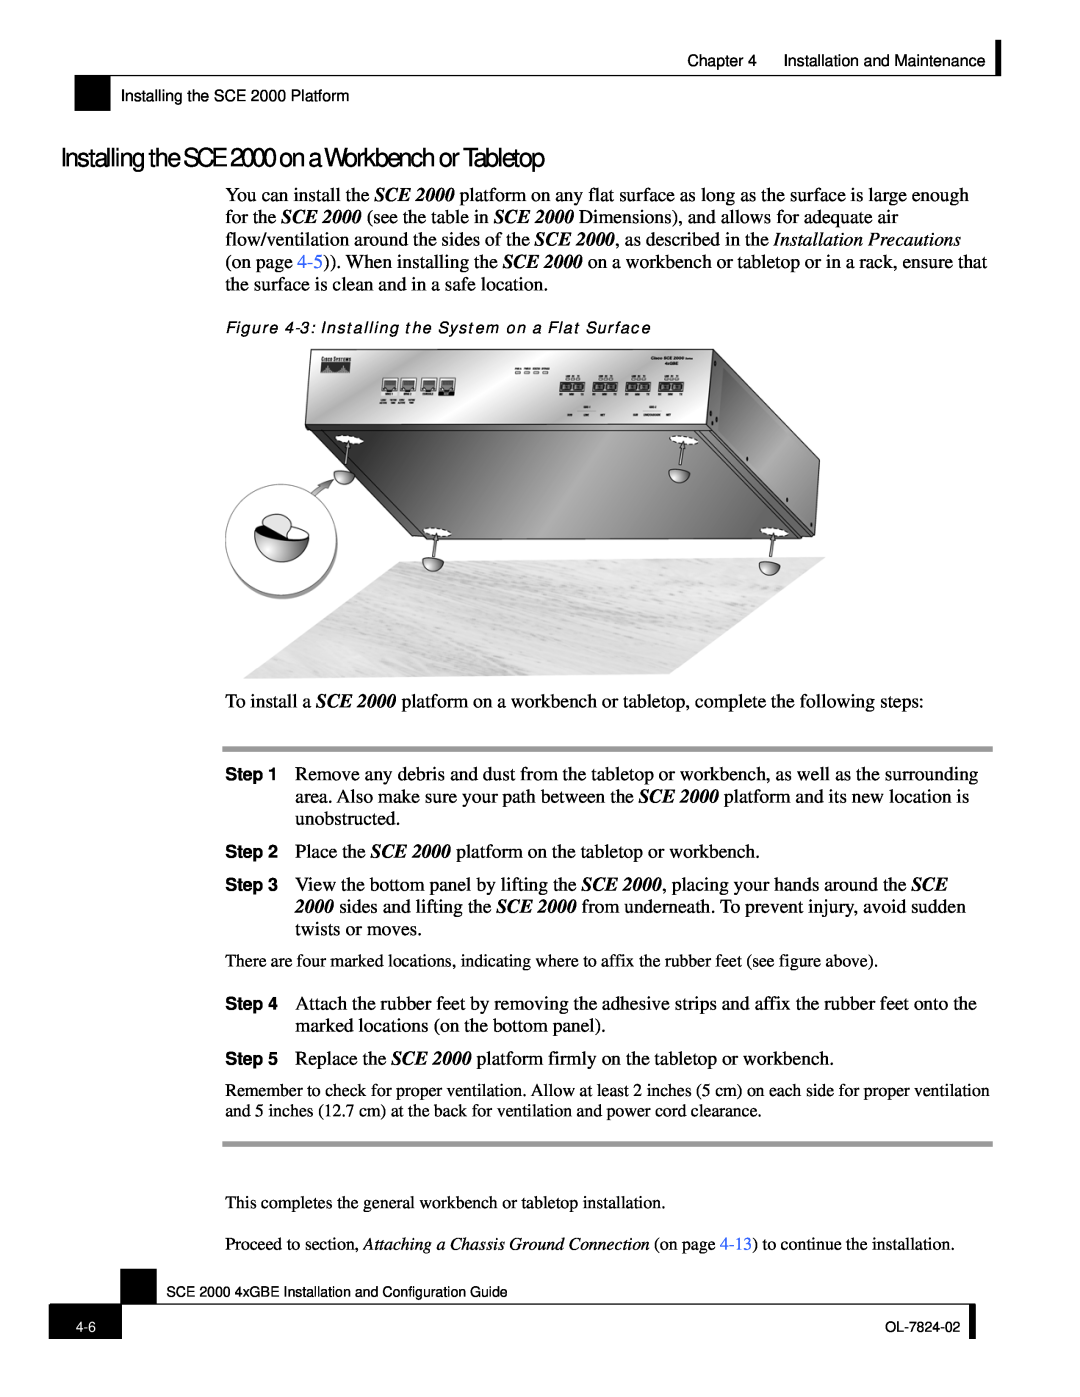 Cisco Systems SCE 2000 4xGBE manual Installing the SCE 2000 on a Workbench or Tabletop 